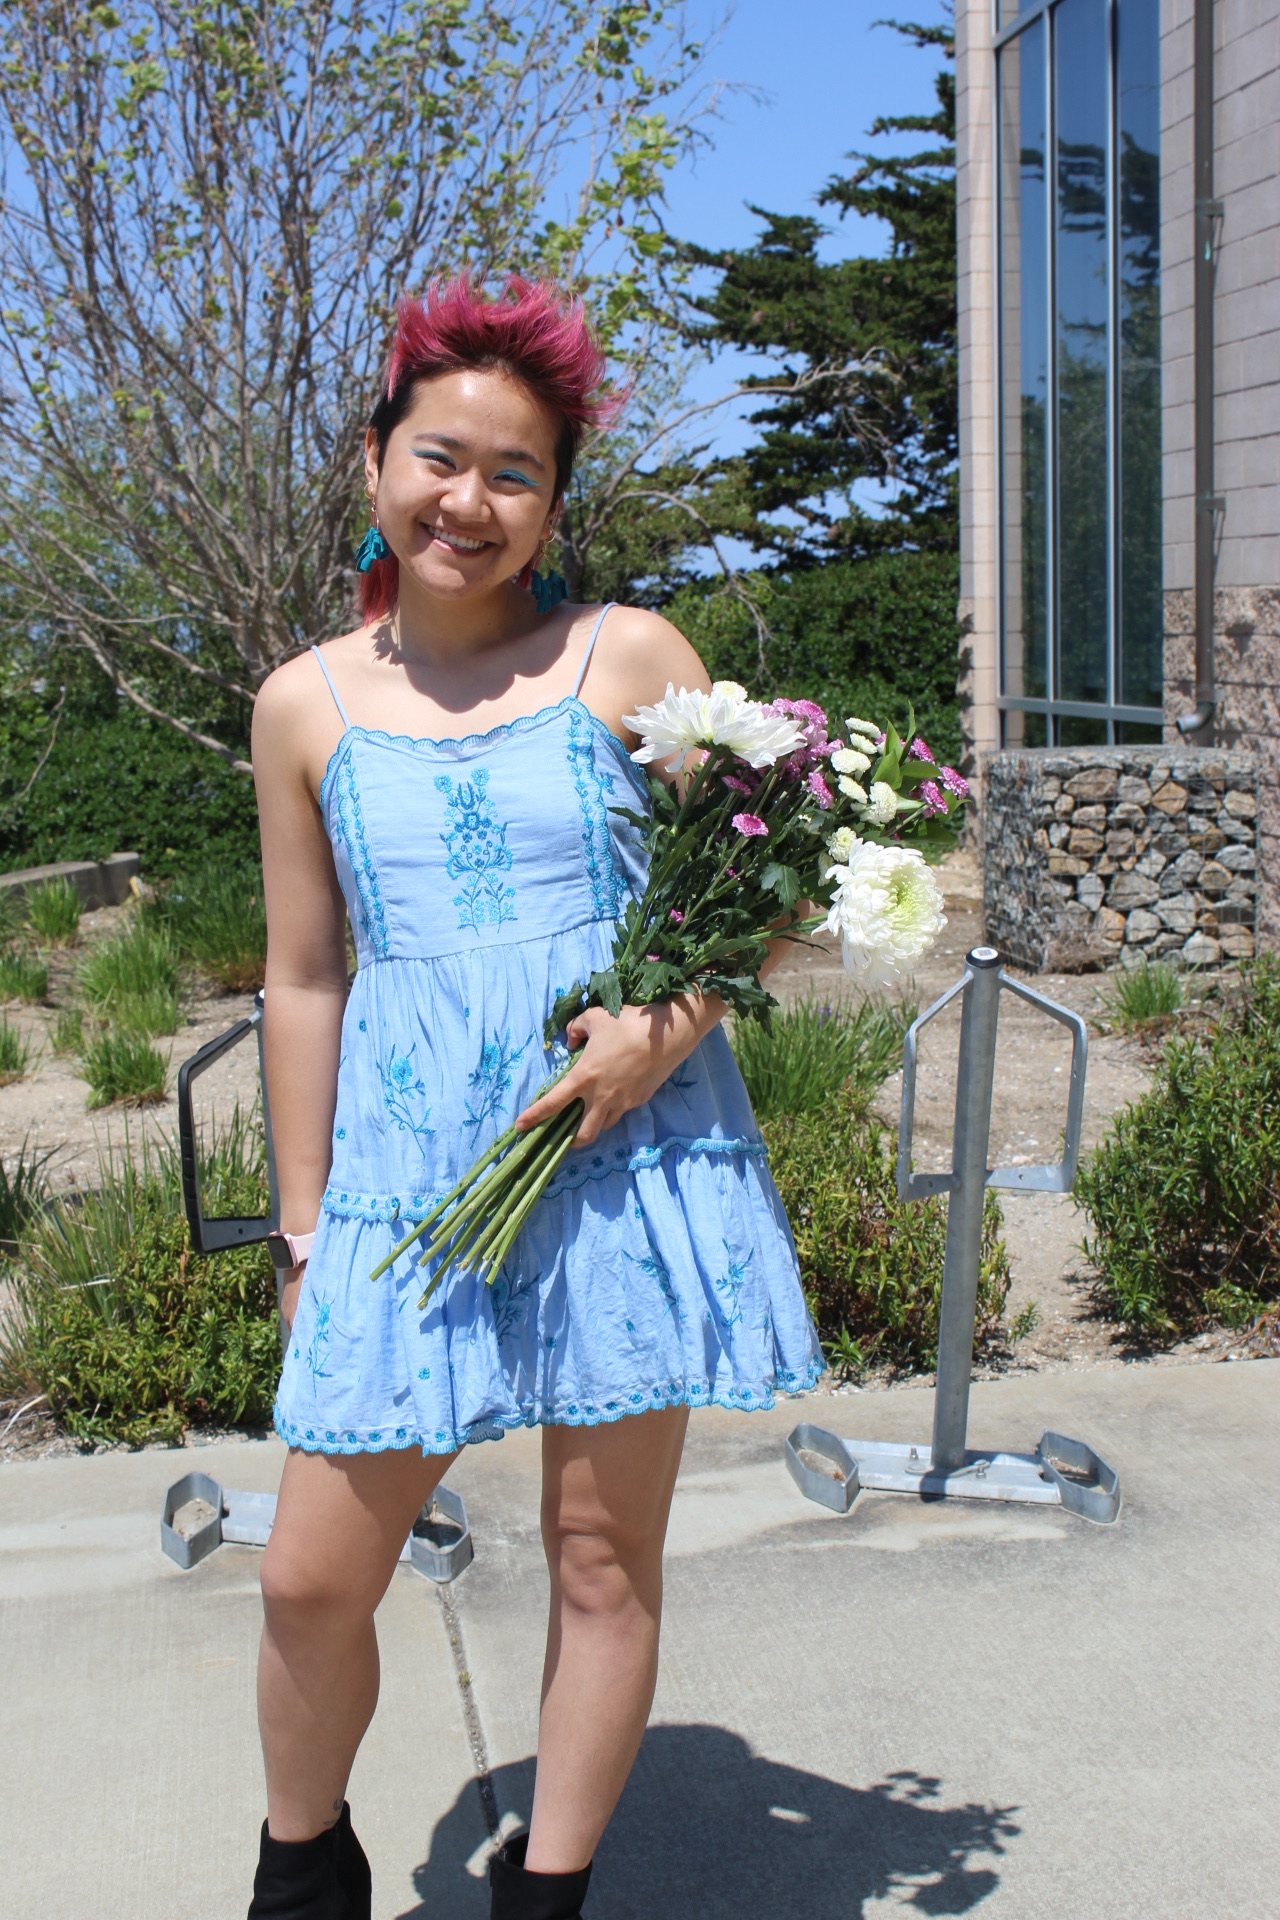 Wendy Feng poses in a blue dress with a bouquet of flowers